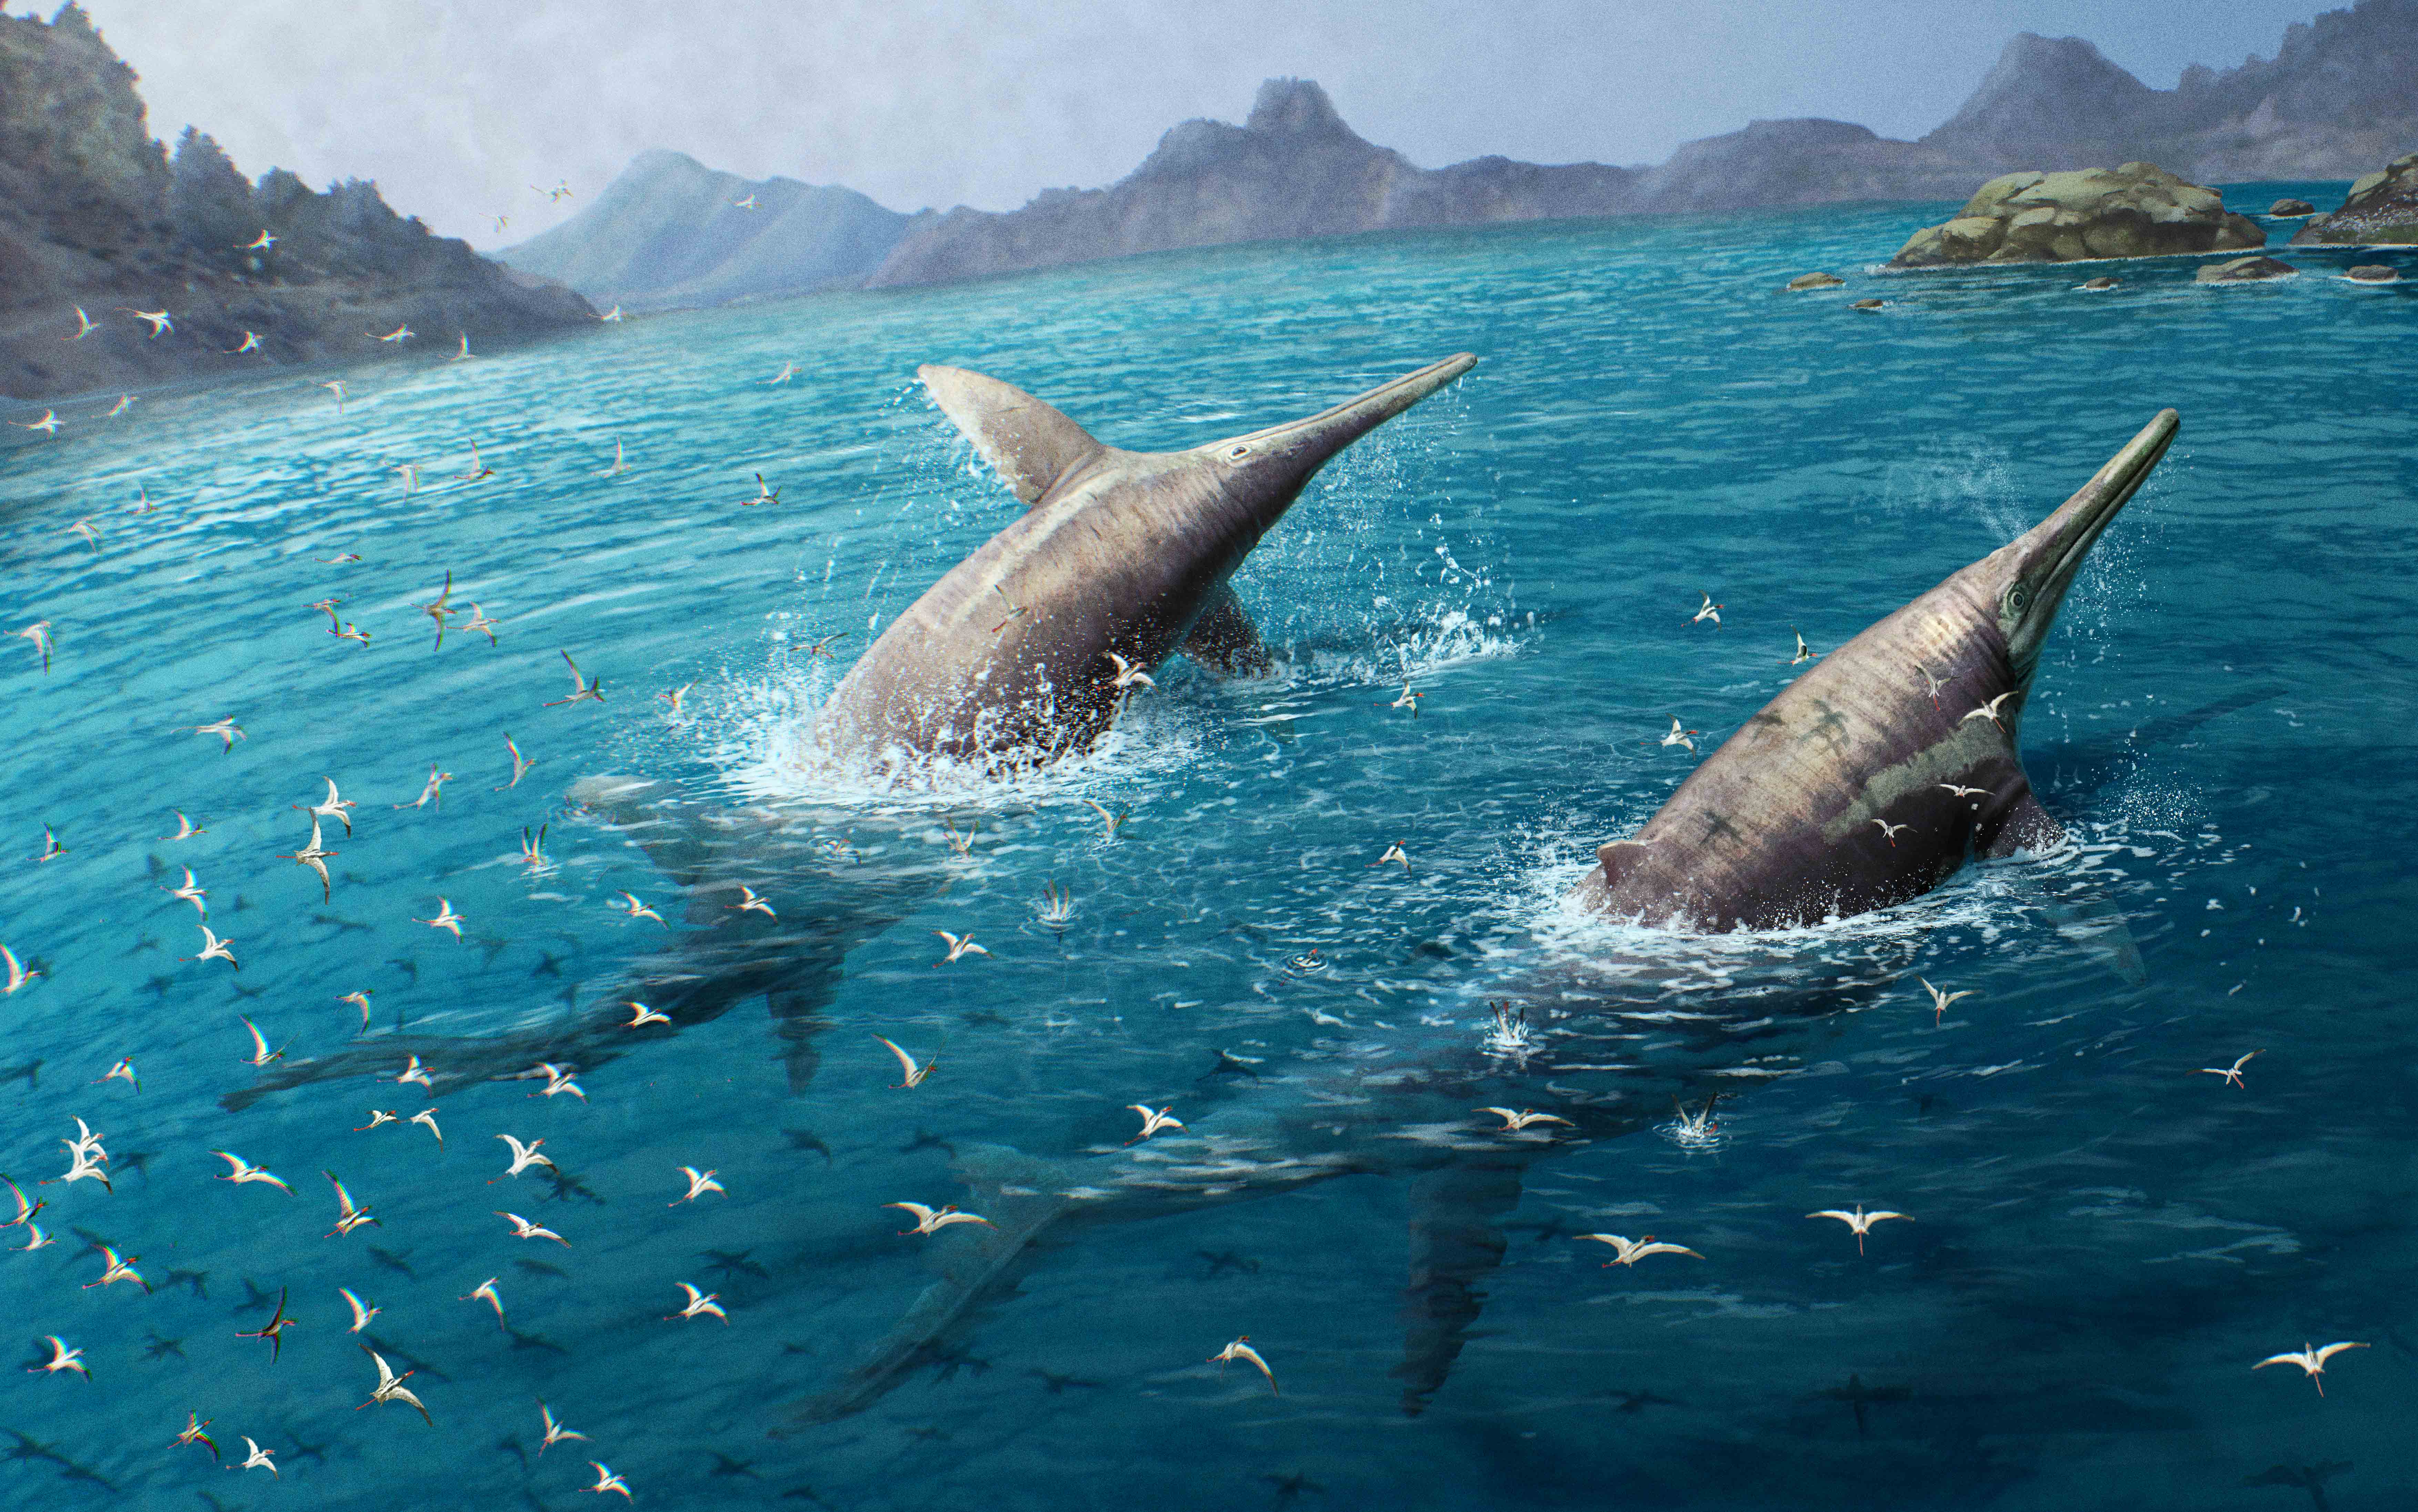 A ichthyosaur species has been identified to be probably the largest marine reptiles